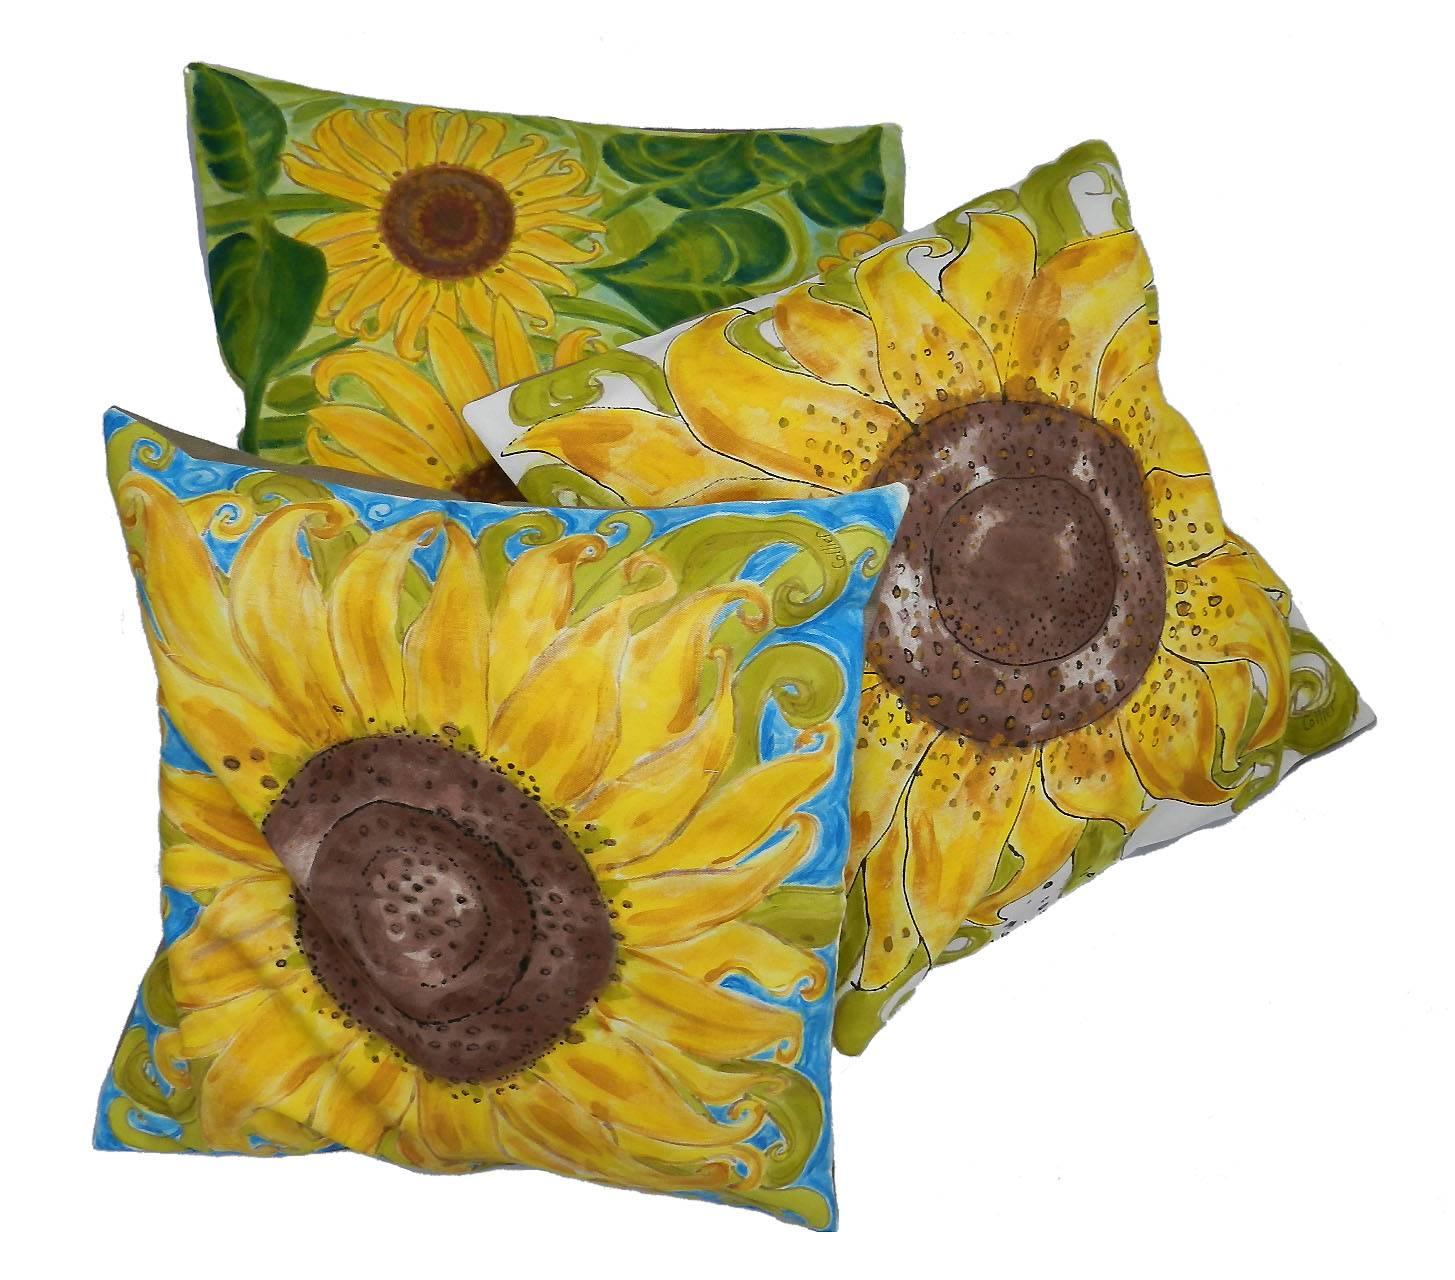 One of a kind throw pillow hand-painted sunflower unique cushion signed by the artist
Joan Collier uses an illustrative quality based on observation, memory and imagination, her work has a distinct style which is rich and colorful with a strong